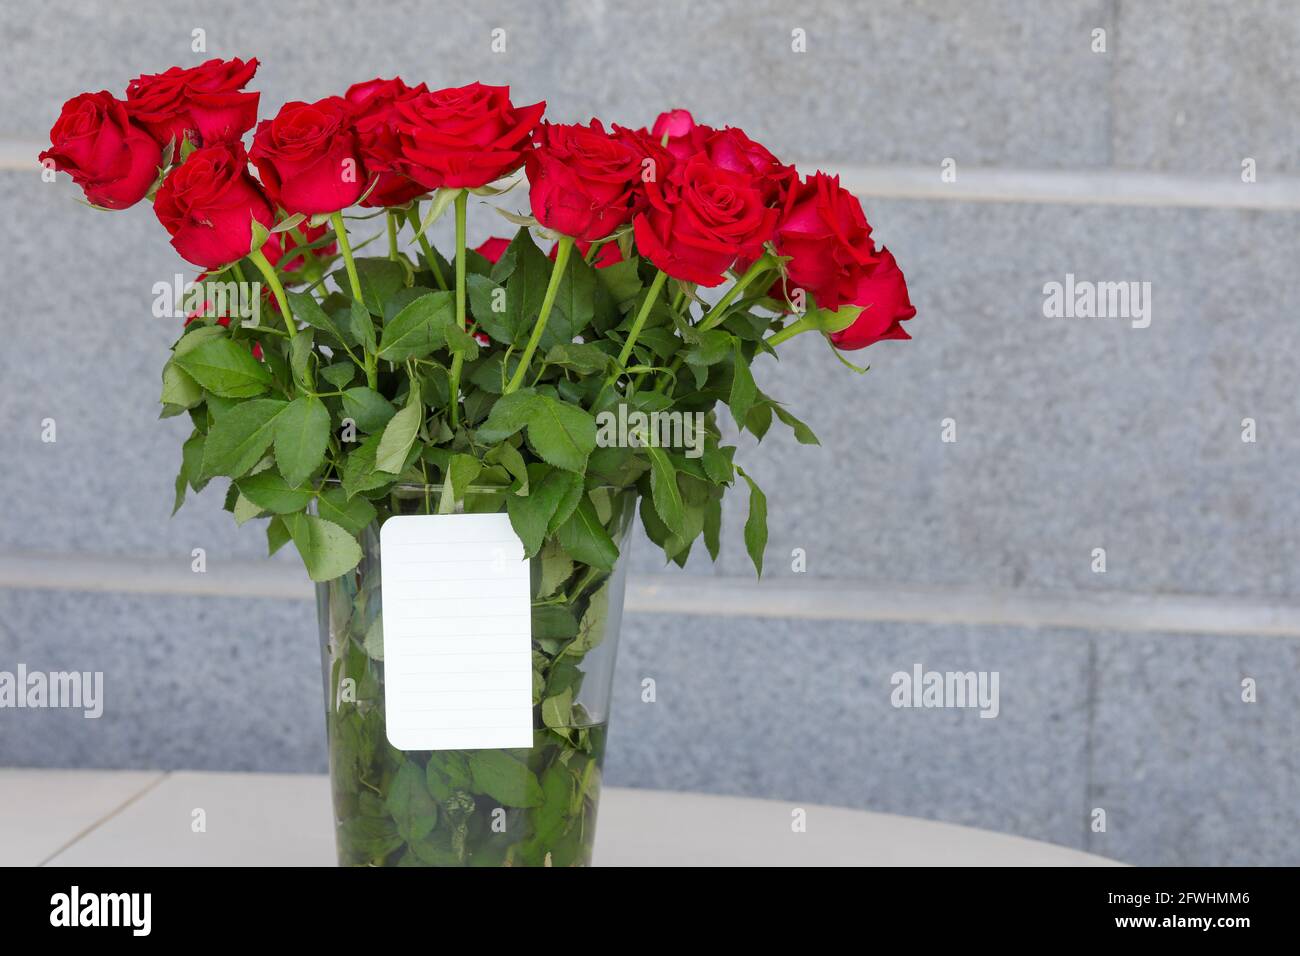 Bouquet of red roses in a vase and a white note for writing a greeting. Stock Photo